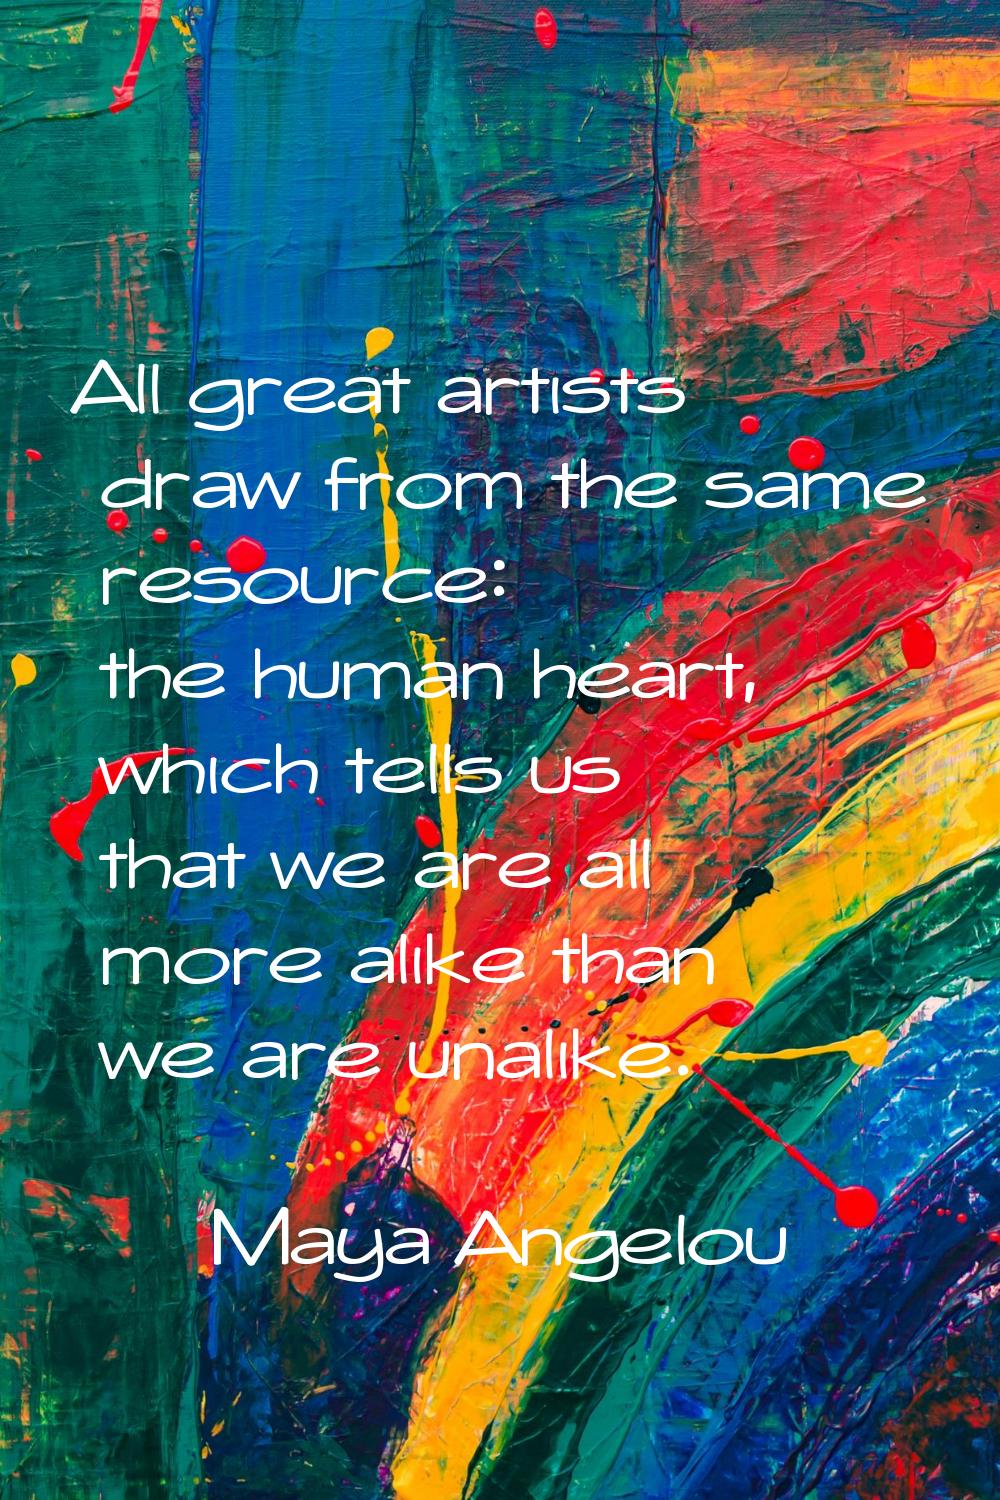 All great artists draw from the same resource: the human heart, which tells us that we are all more